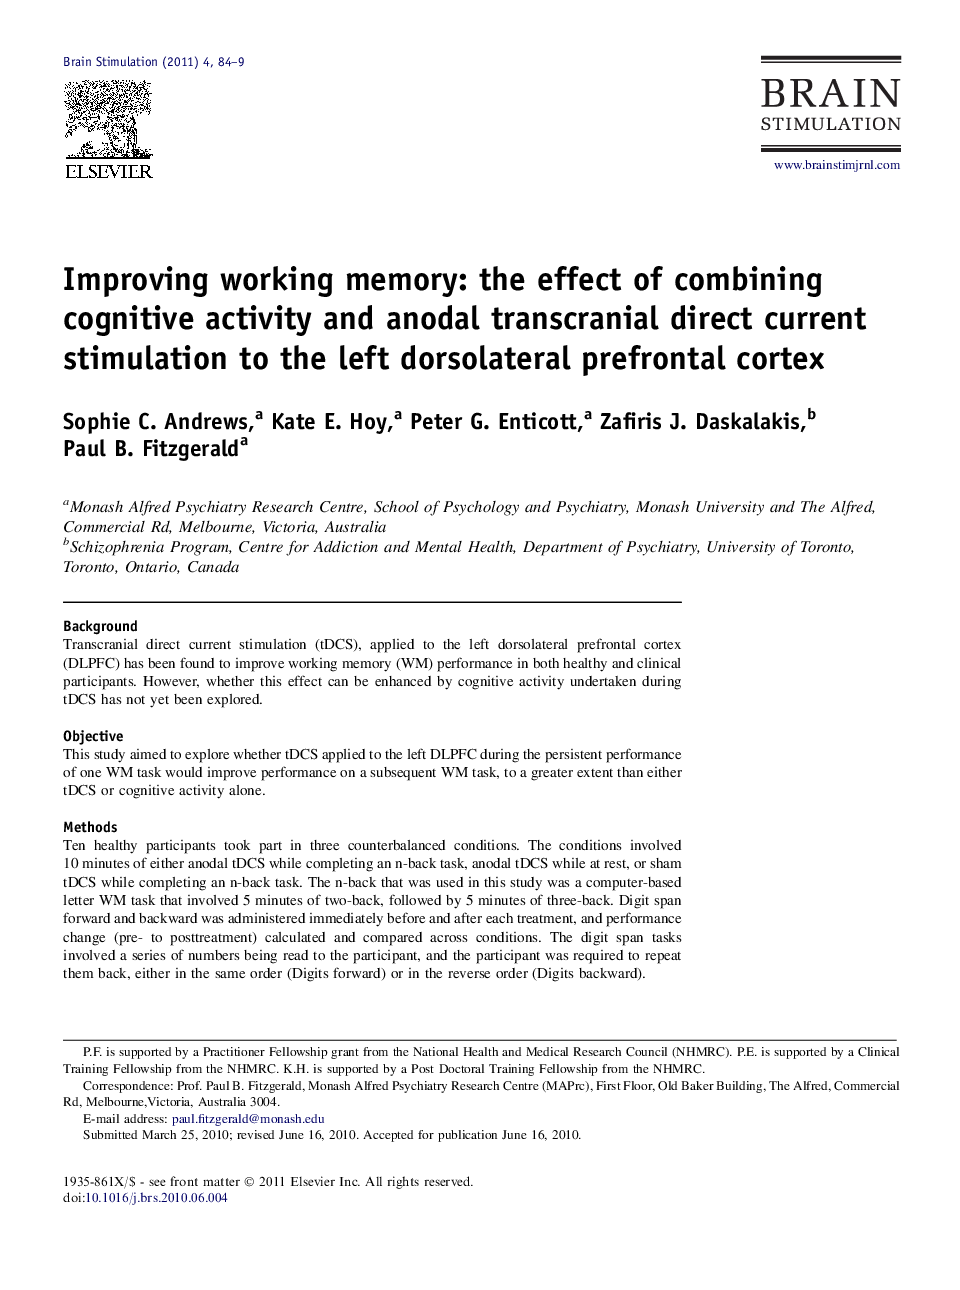 Improving working memory: the effect of combining cognitive activity and anodal transcranial direct current stimulation to the left dorsolateral prefrontal cortex 